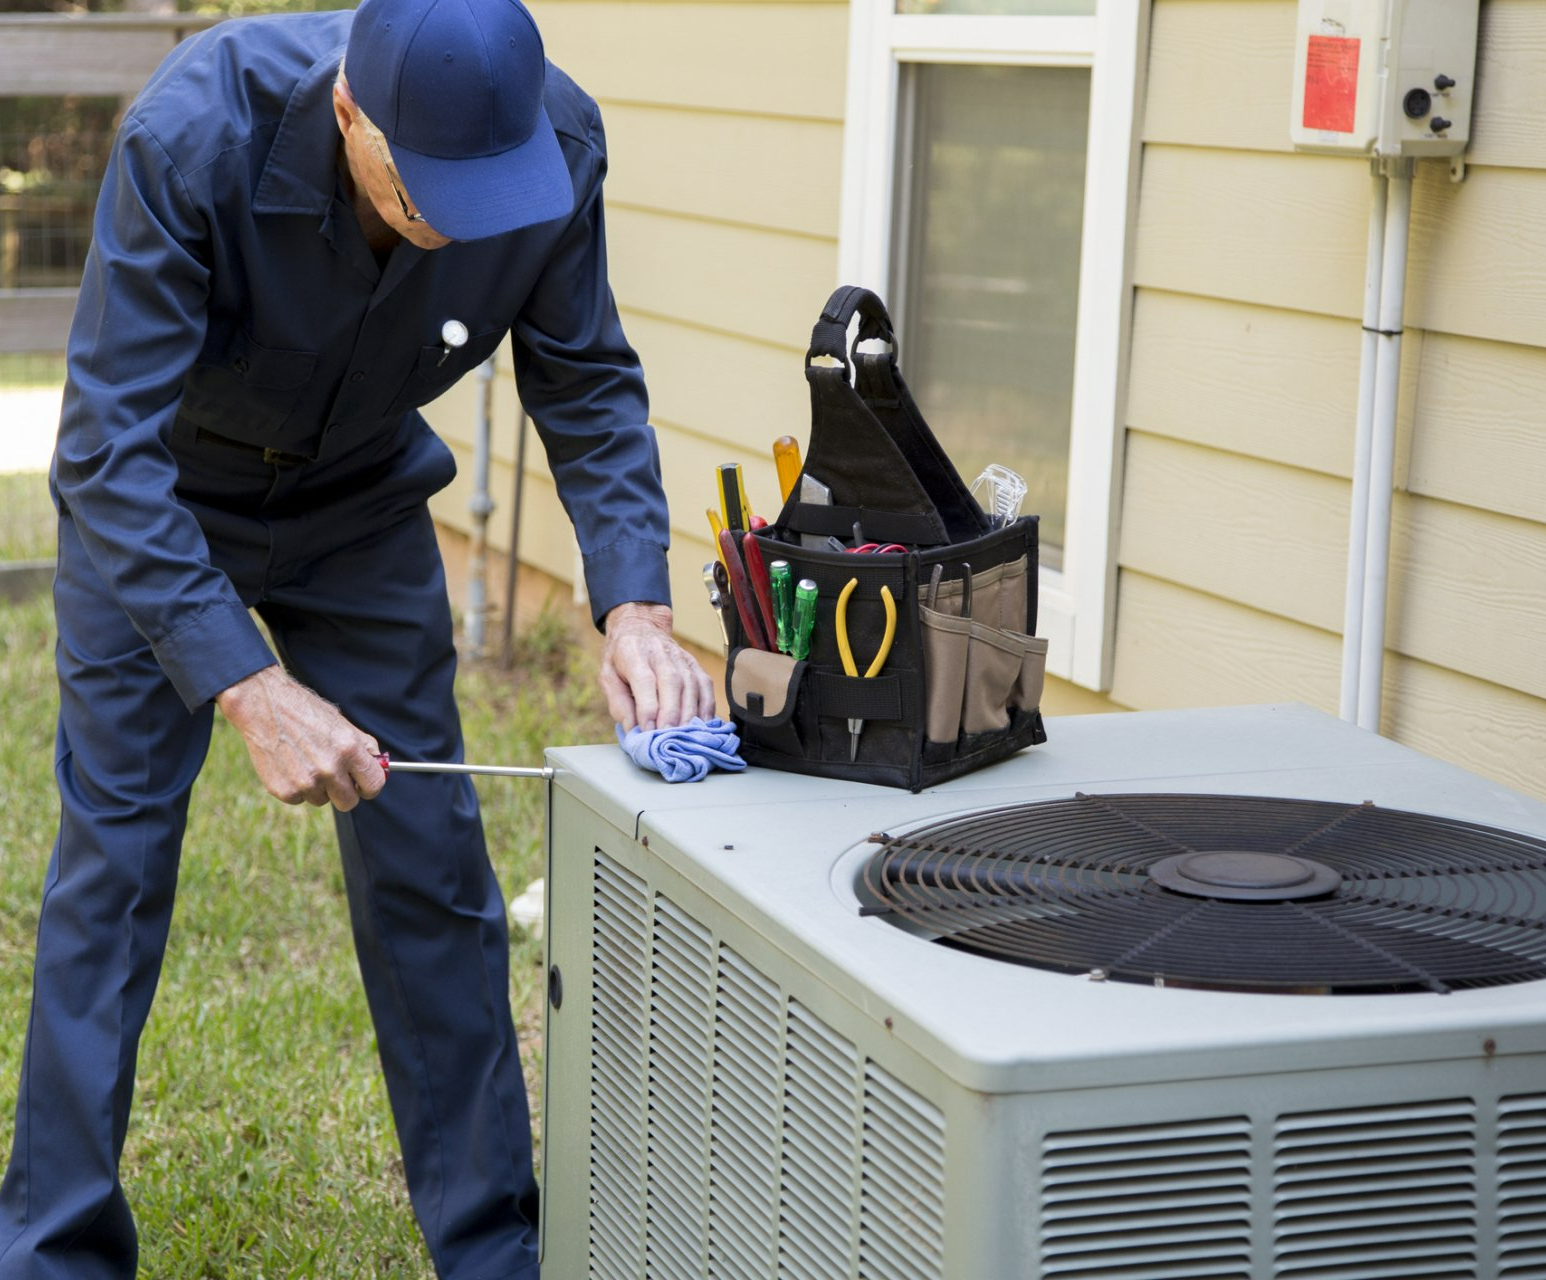 Technician Services Outside AC Units And Generator - Hendersonville, NC - Tucker Heating & Air